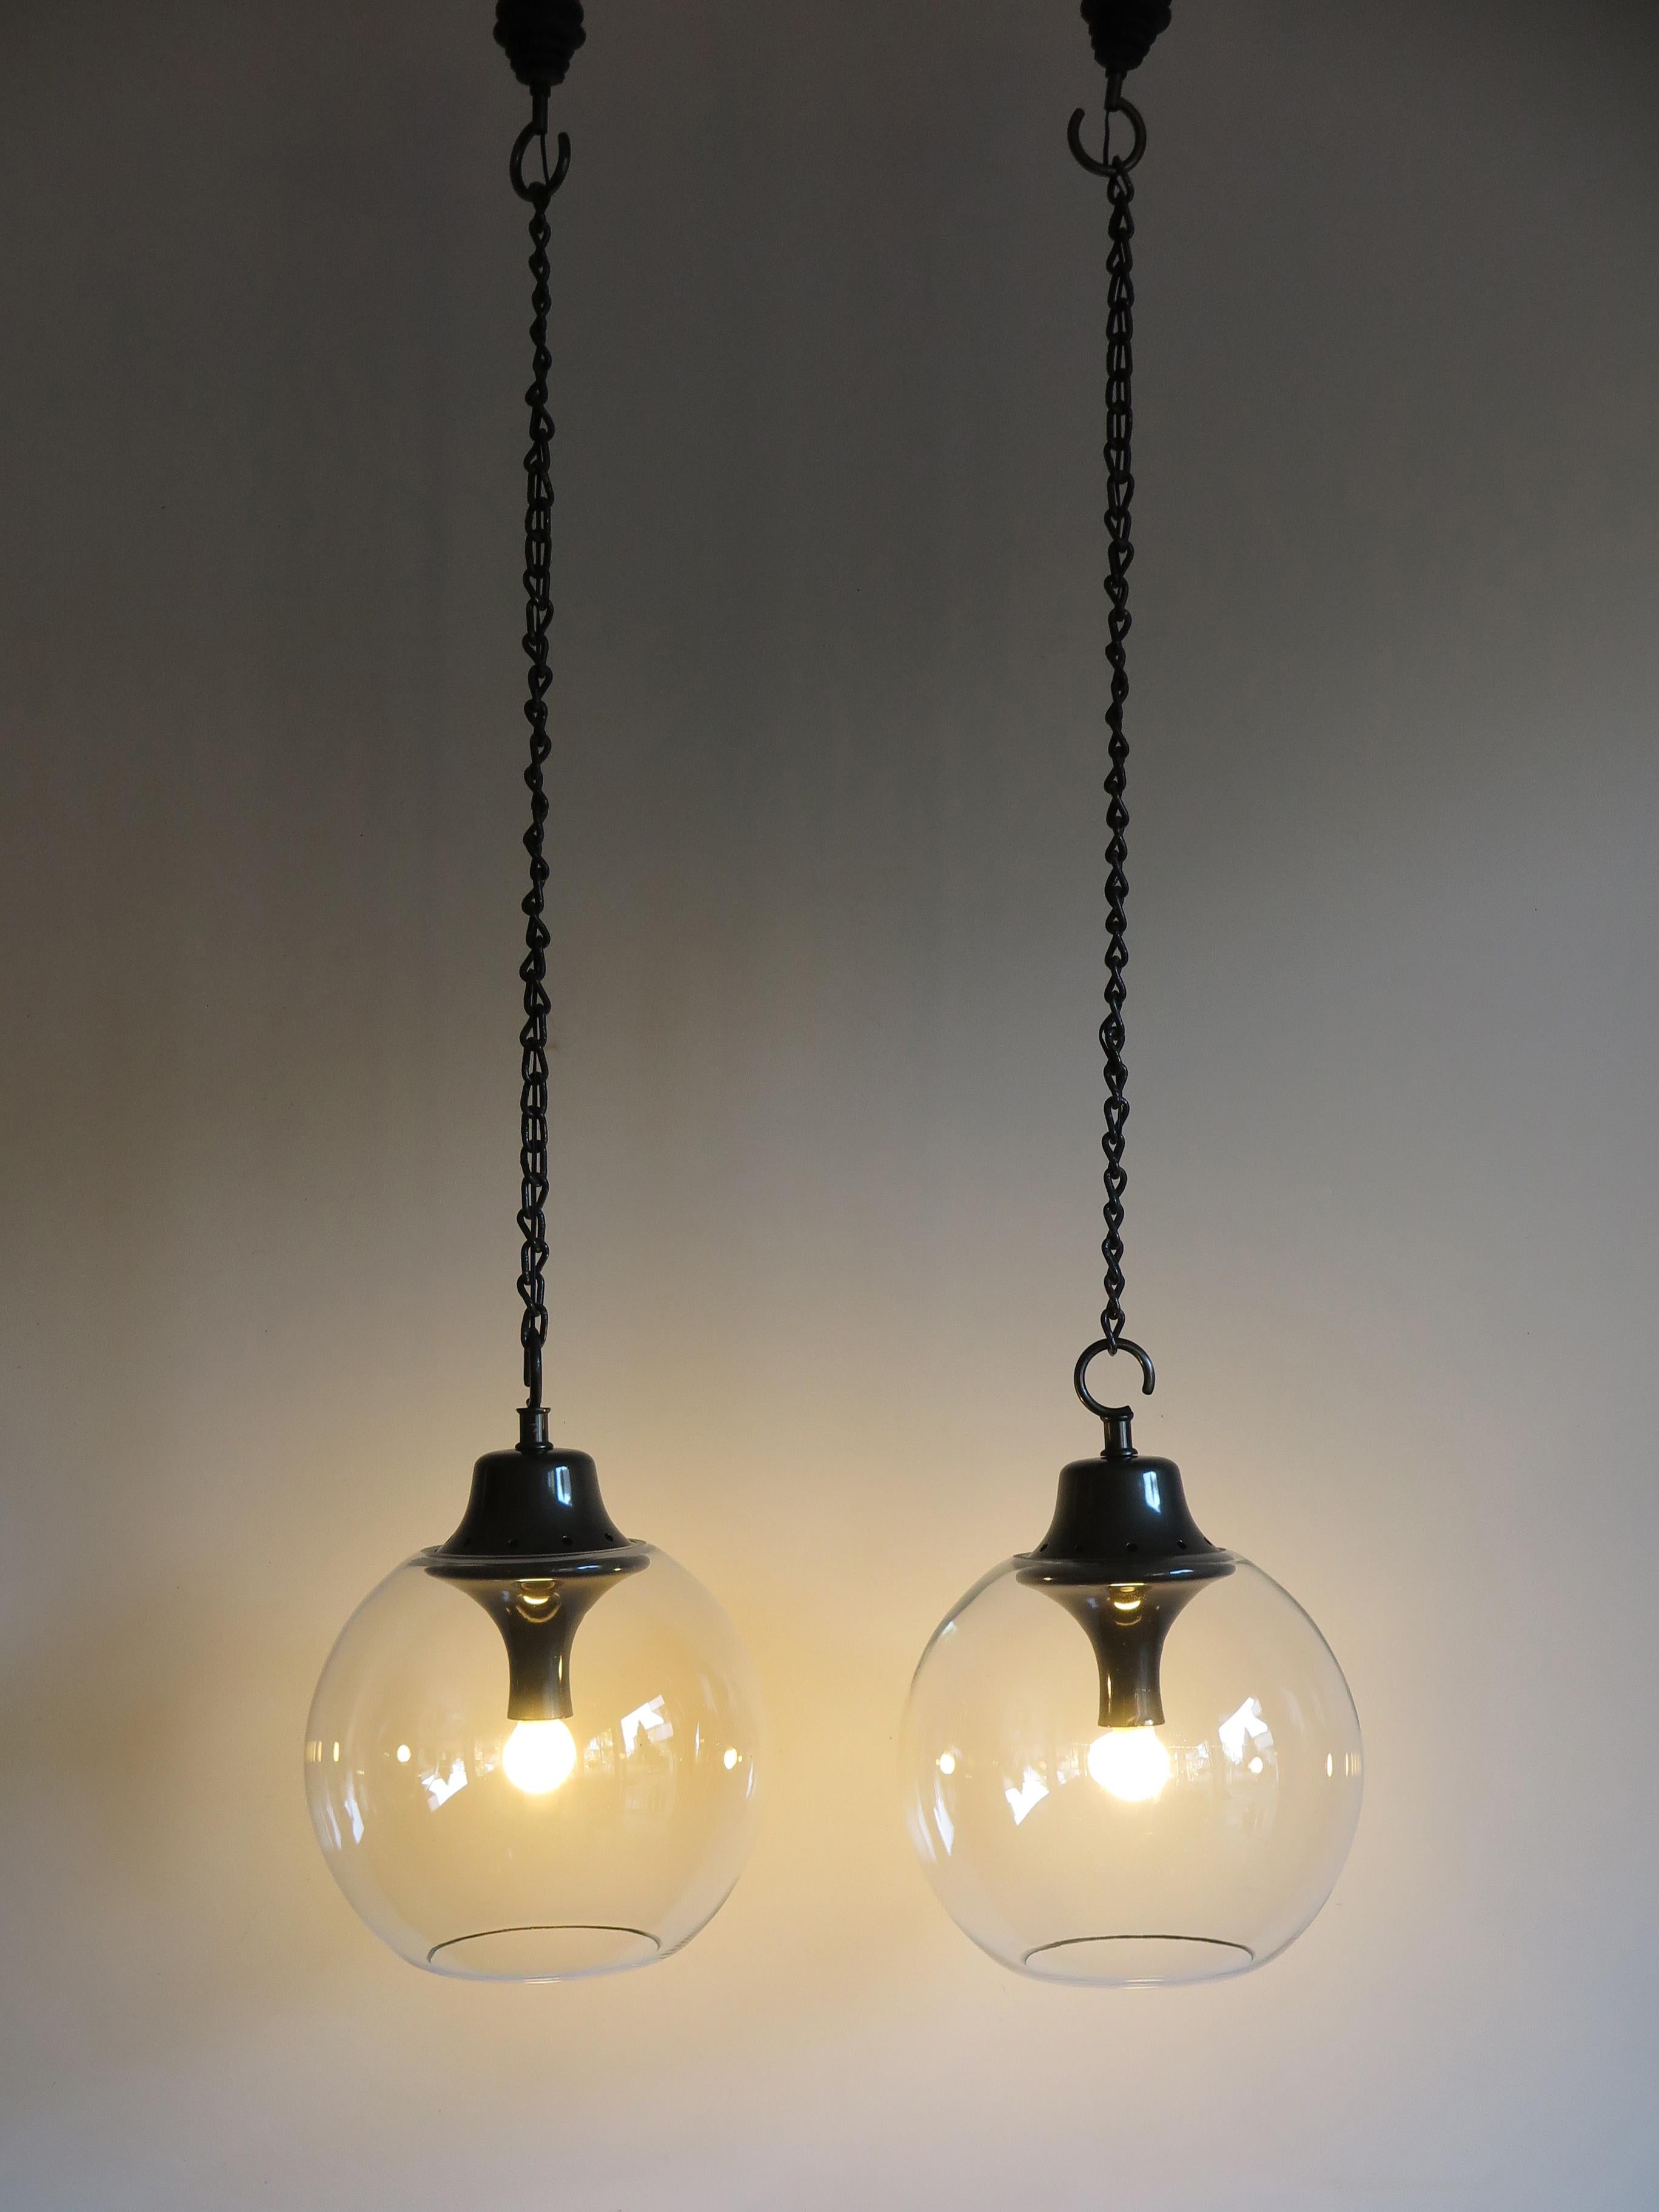 Italian Mid-Century Modern design couple of pendant lamps designed by Luigi Caccia Dominioni and produced by Azucena Milano in 1967,
lamp holder in metallized gray aluminum, double hook in burnished iron and lampshade in a globe in colorless blown